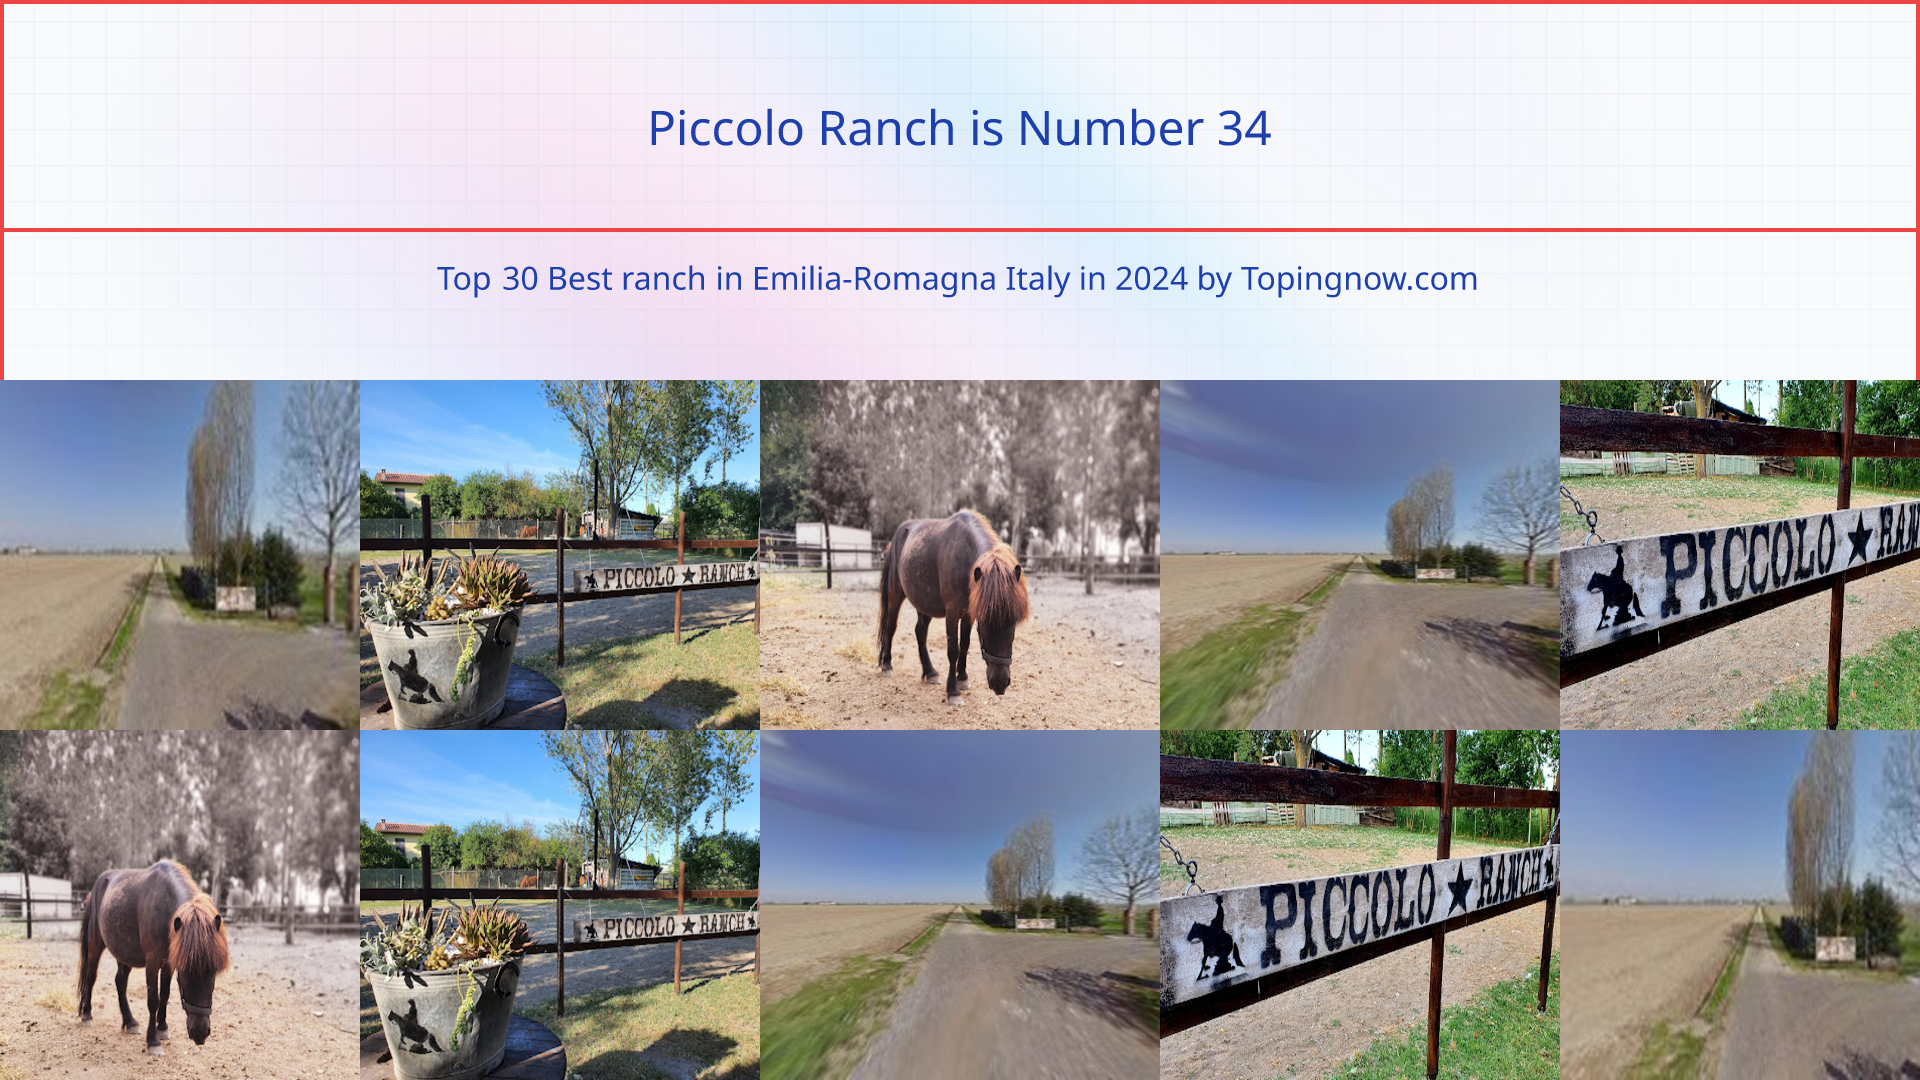 Piccolo Ranch: Top 30 Best ranch in Emilia-Romagna Italy in 2024